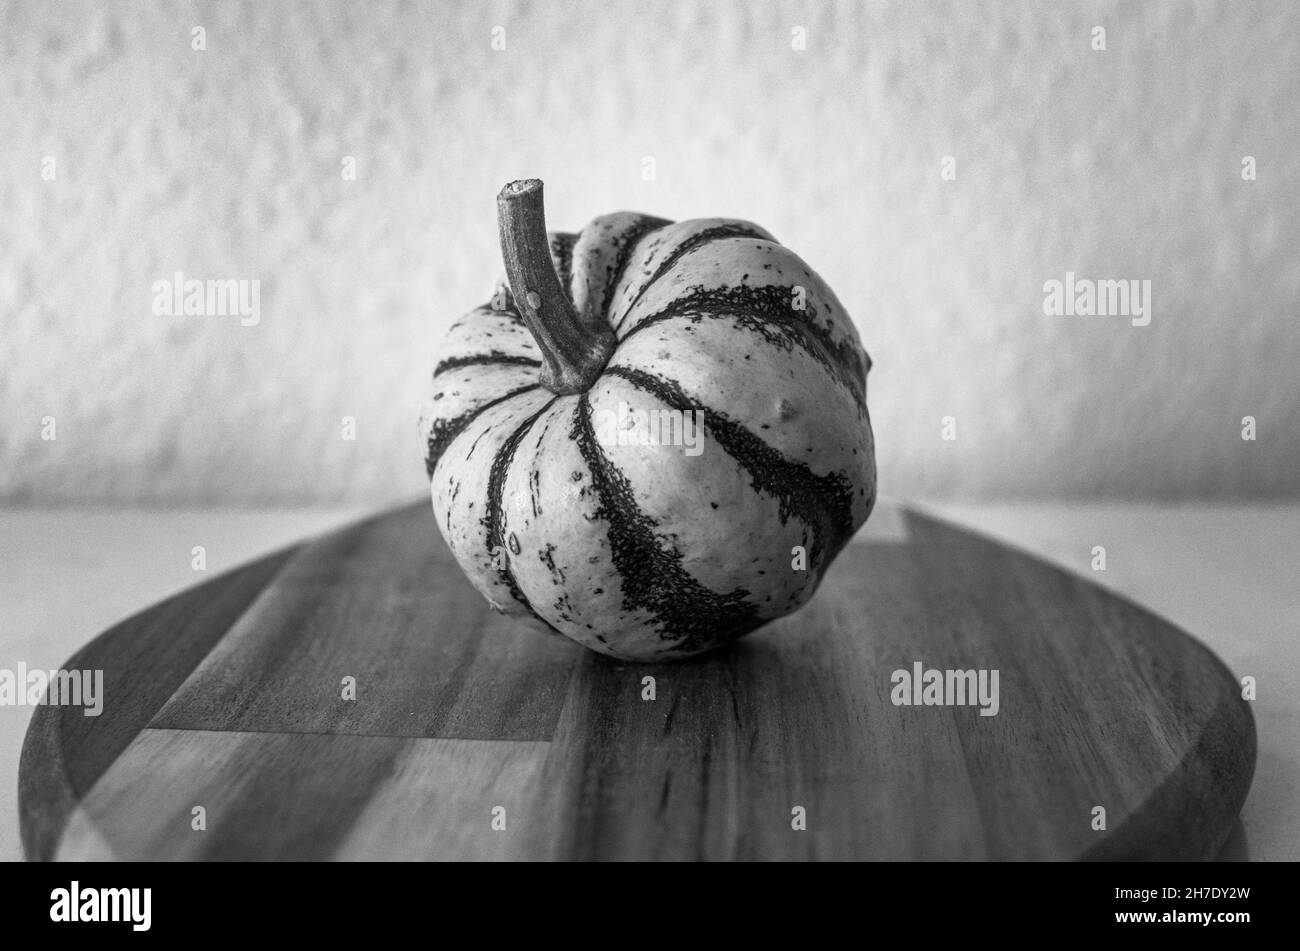 a single mini green and white decorative pumpkin displayed on a wooden chopping board monochrome Stock Photo